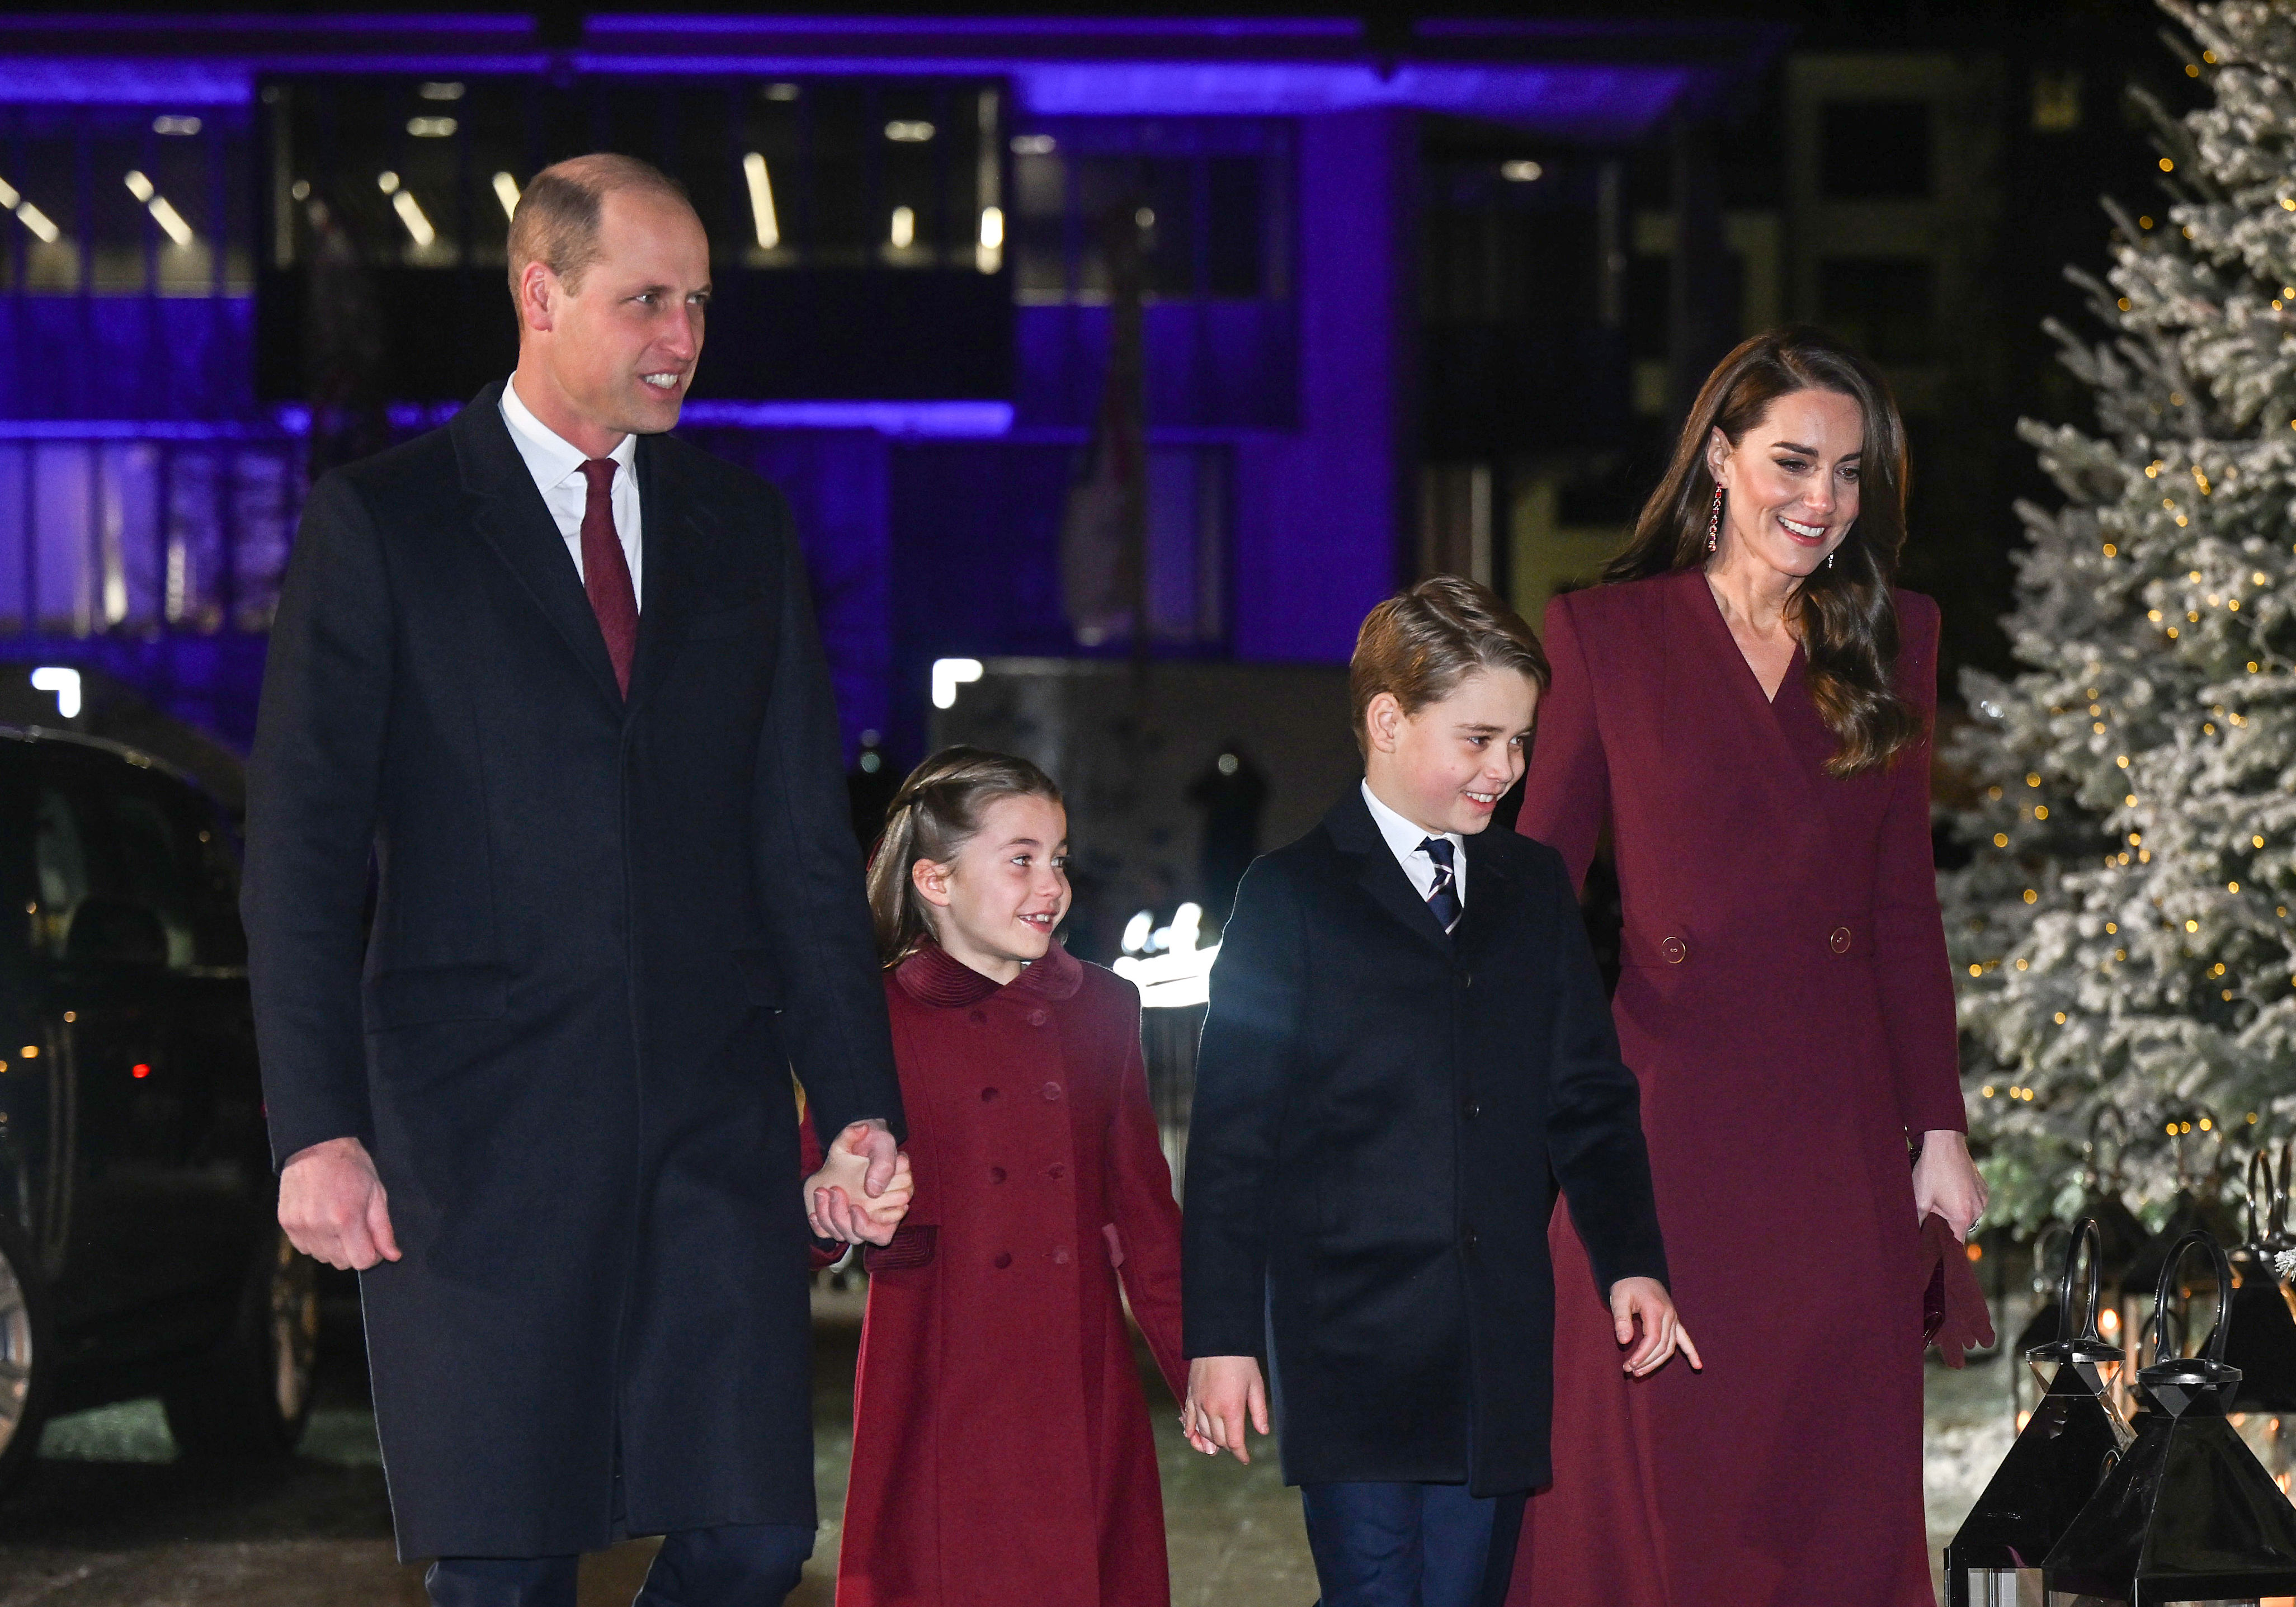 <p><a href="https://www.wonderwall.com/celebrity/profiles/overview/prince-william-482.article">Prince William</a> and Princess Kate brought their two oldest kids, Princess Charlotte and Prince George, to Kate's Together at Christmas carol service at Westminster Abbey in London on Dec. 15, 2022.</p>